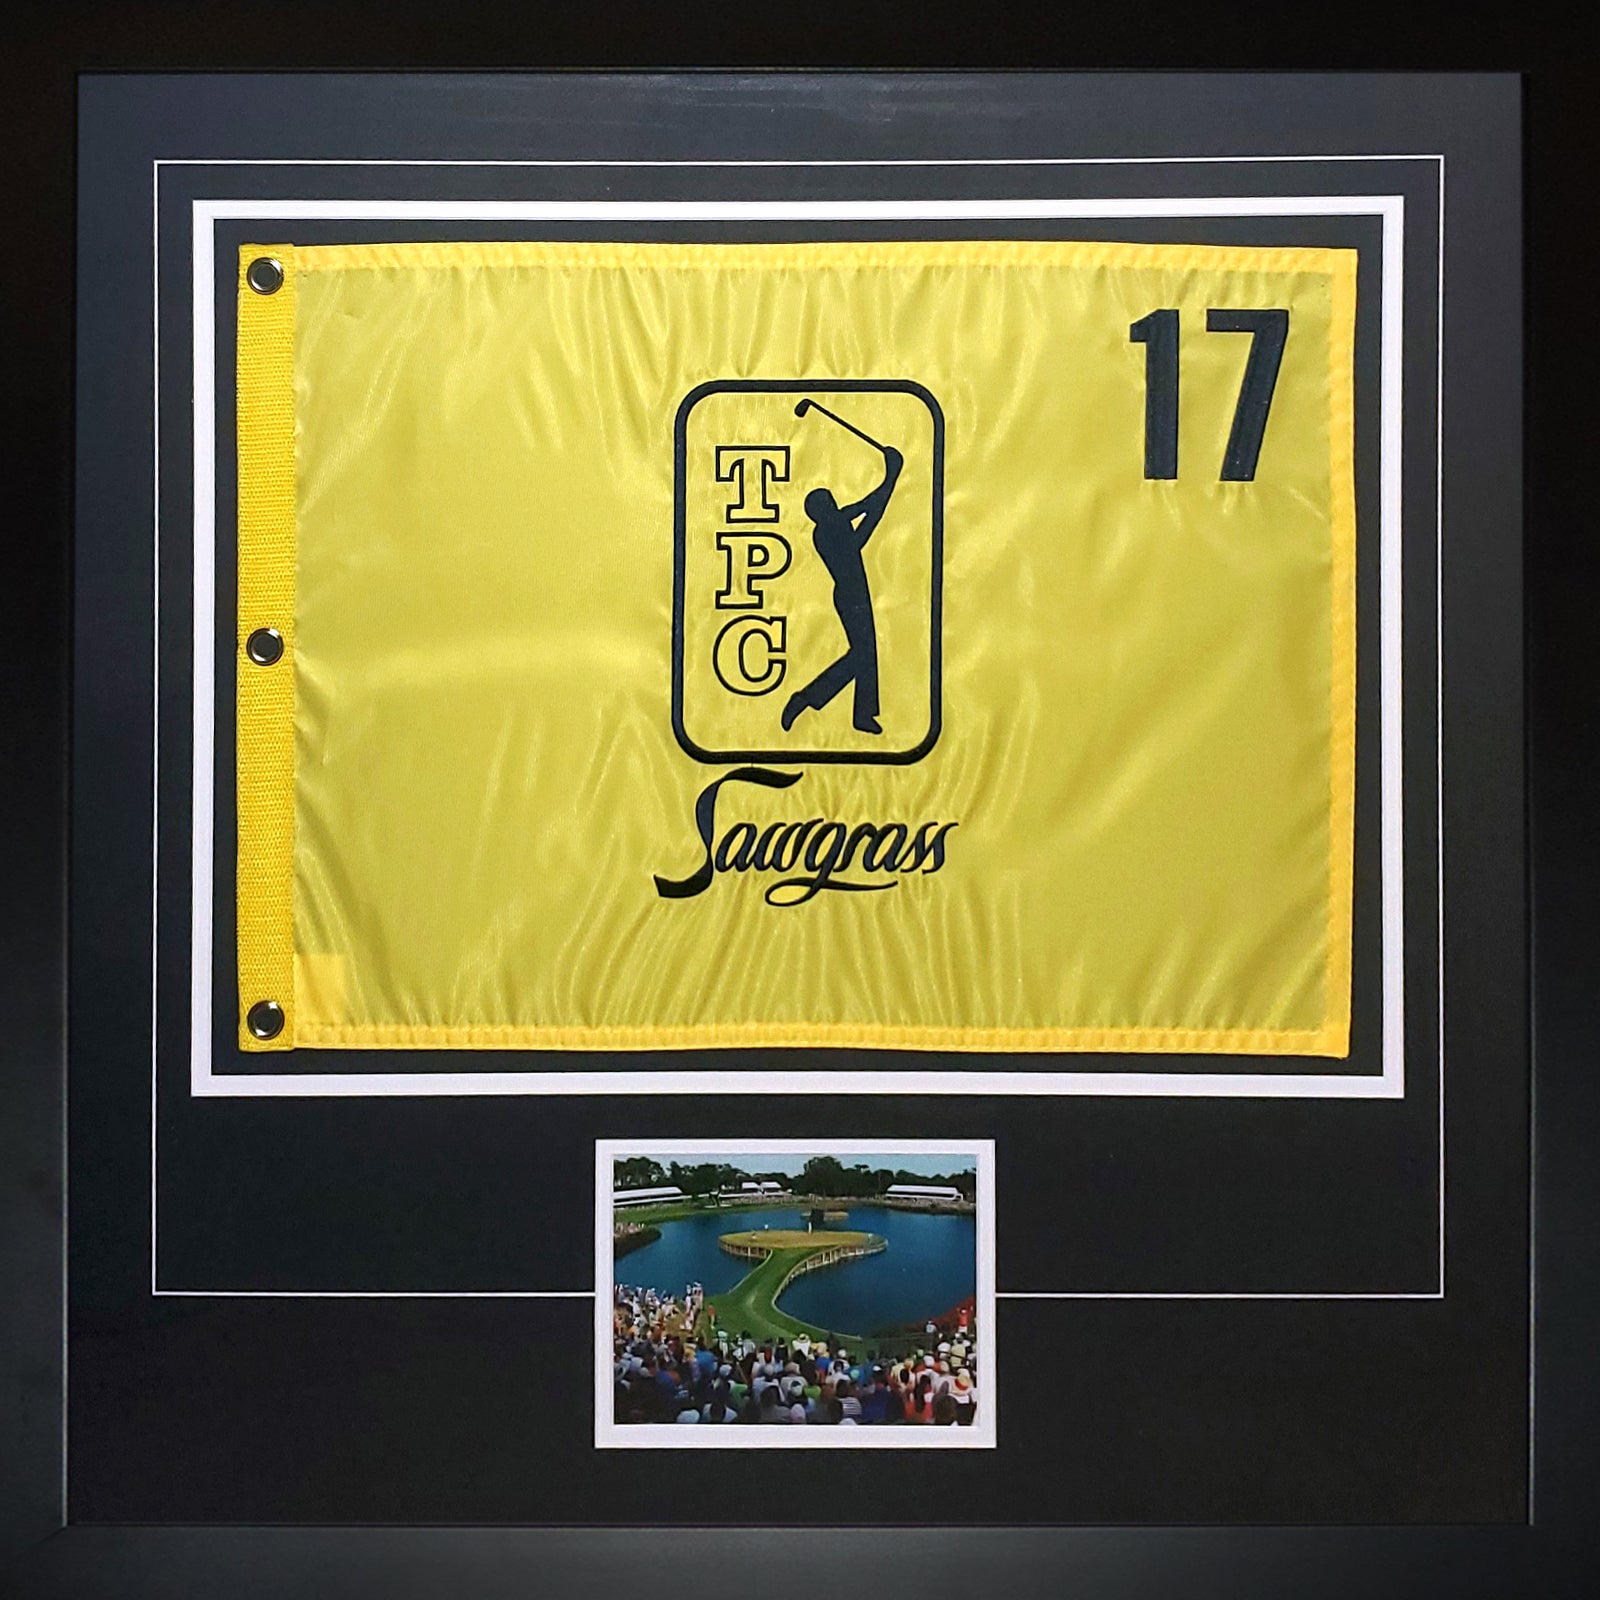 TPC Sawgrass (Yellow #17) Deluxe Framed Golf Pin Flag with Photo